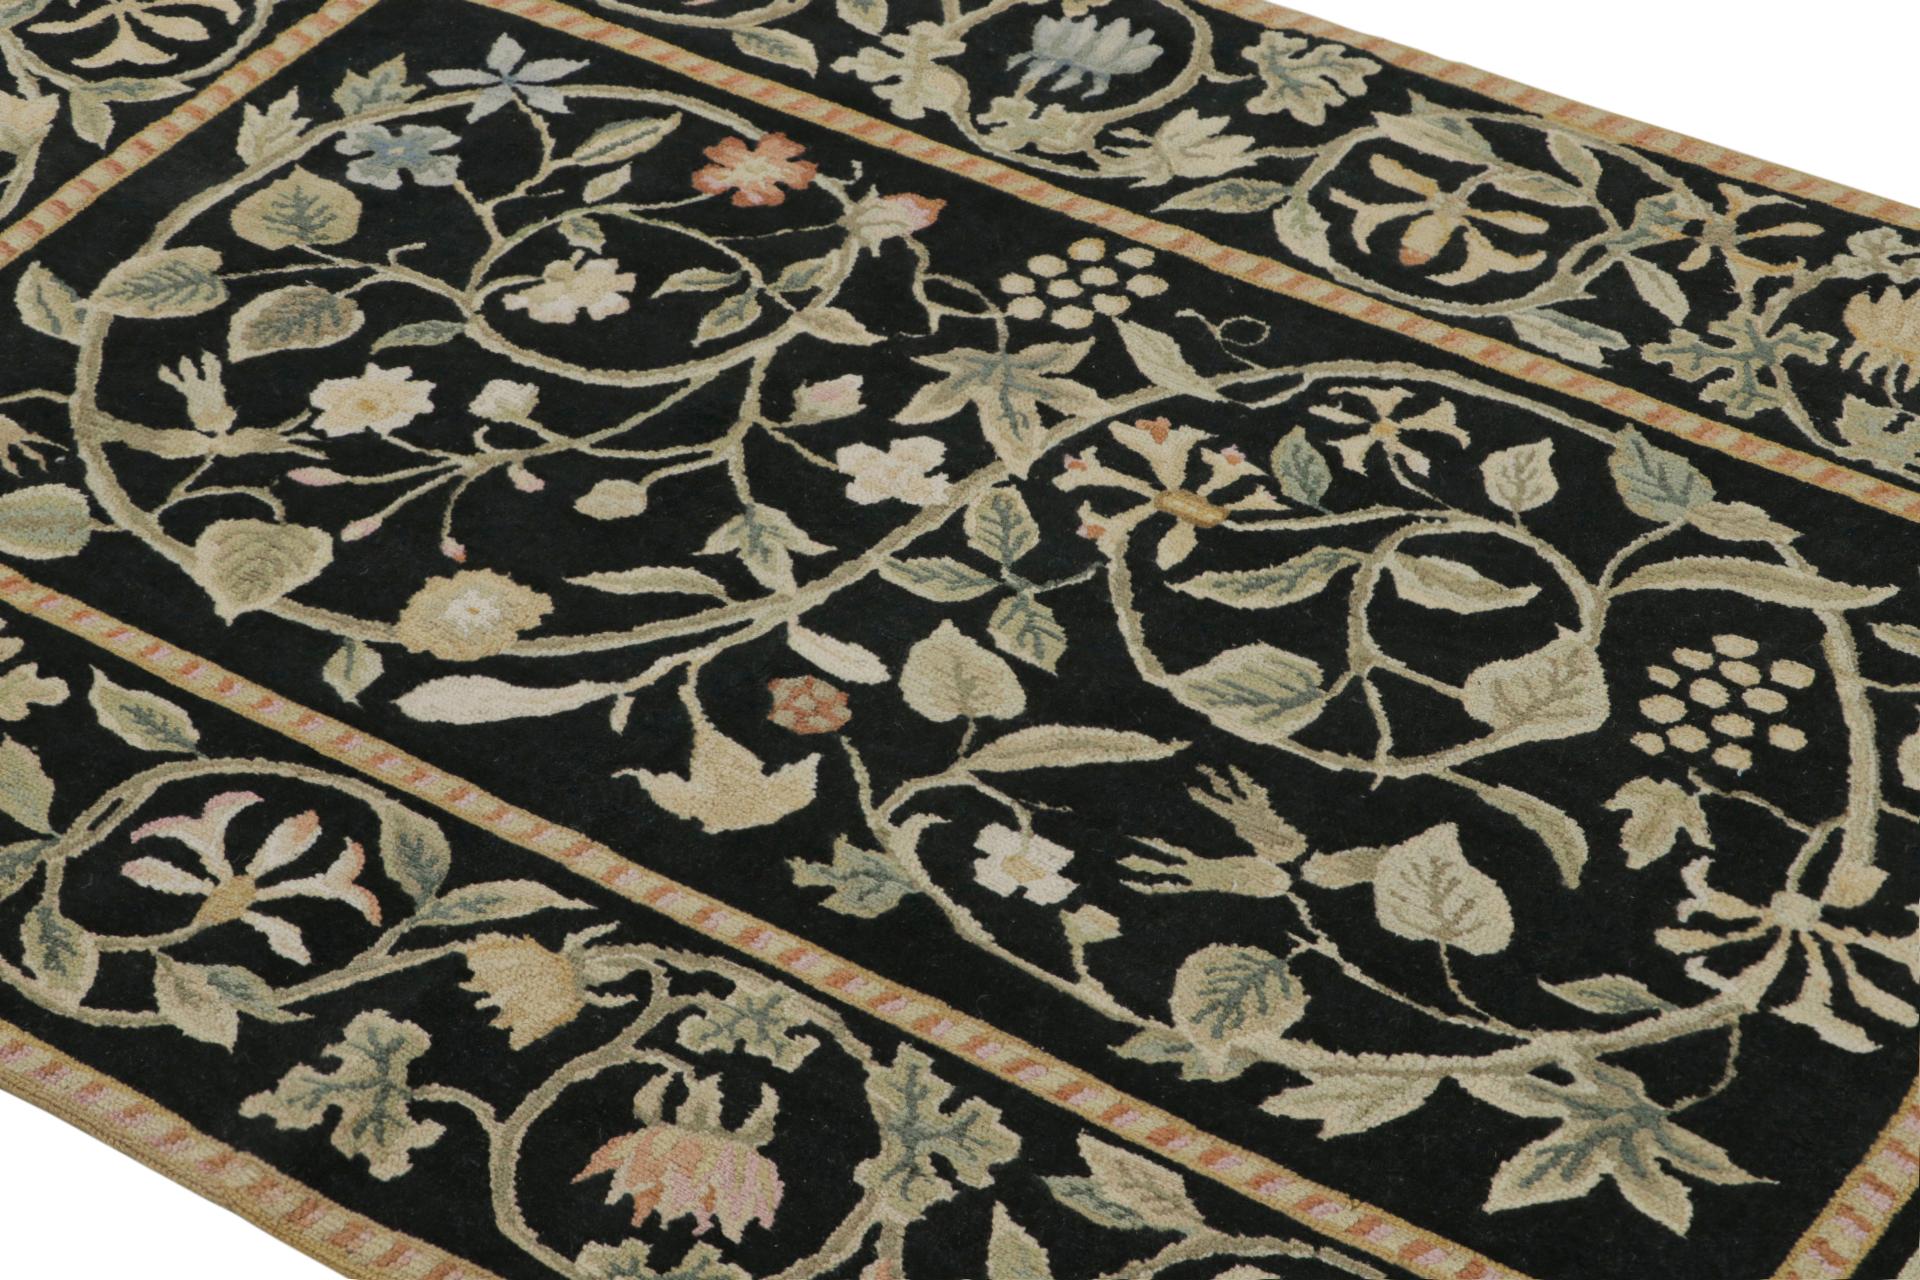 Chinese Rug & kilim’s European Style Rug in Black with Beige and Green Floral Patterns For Sale